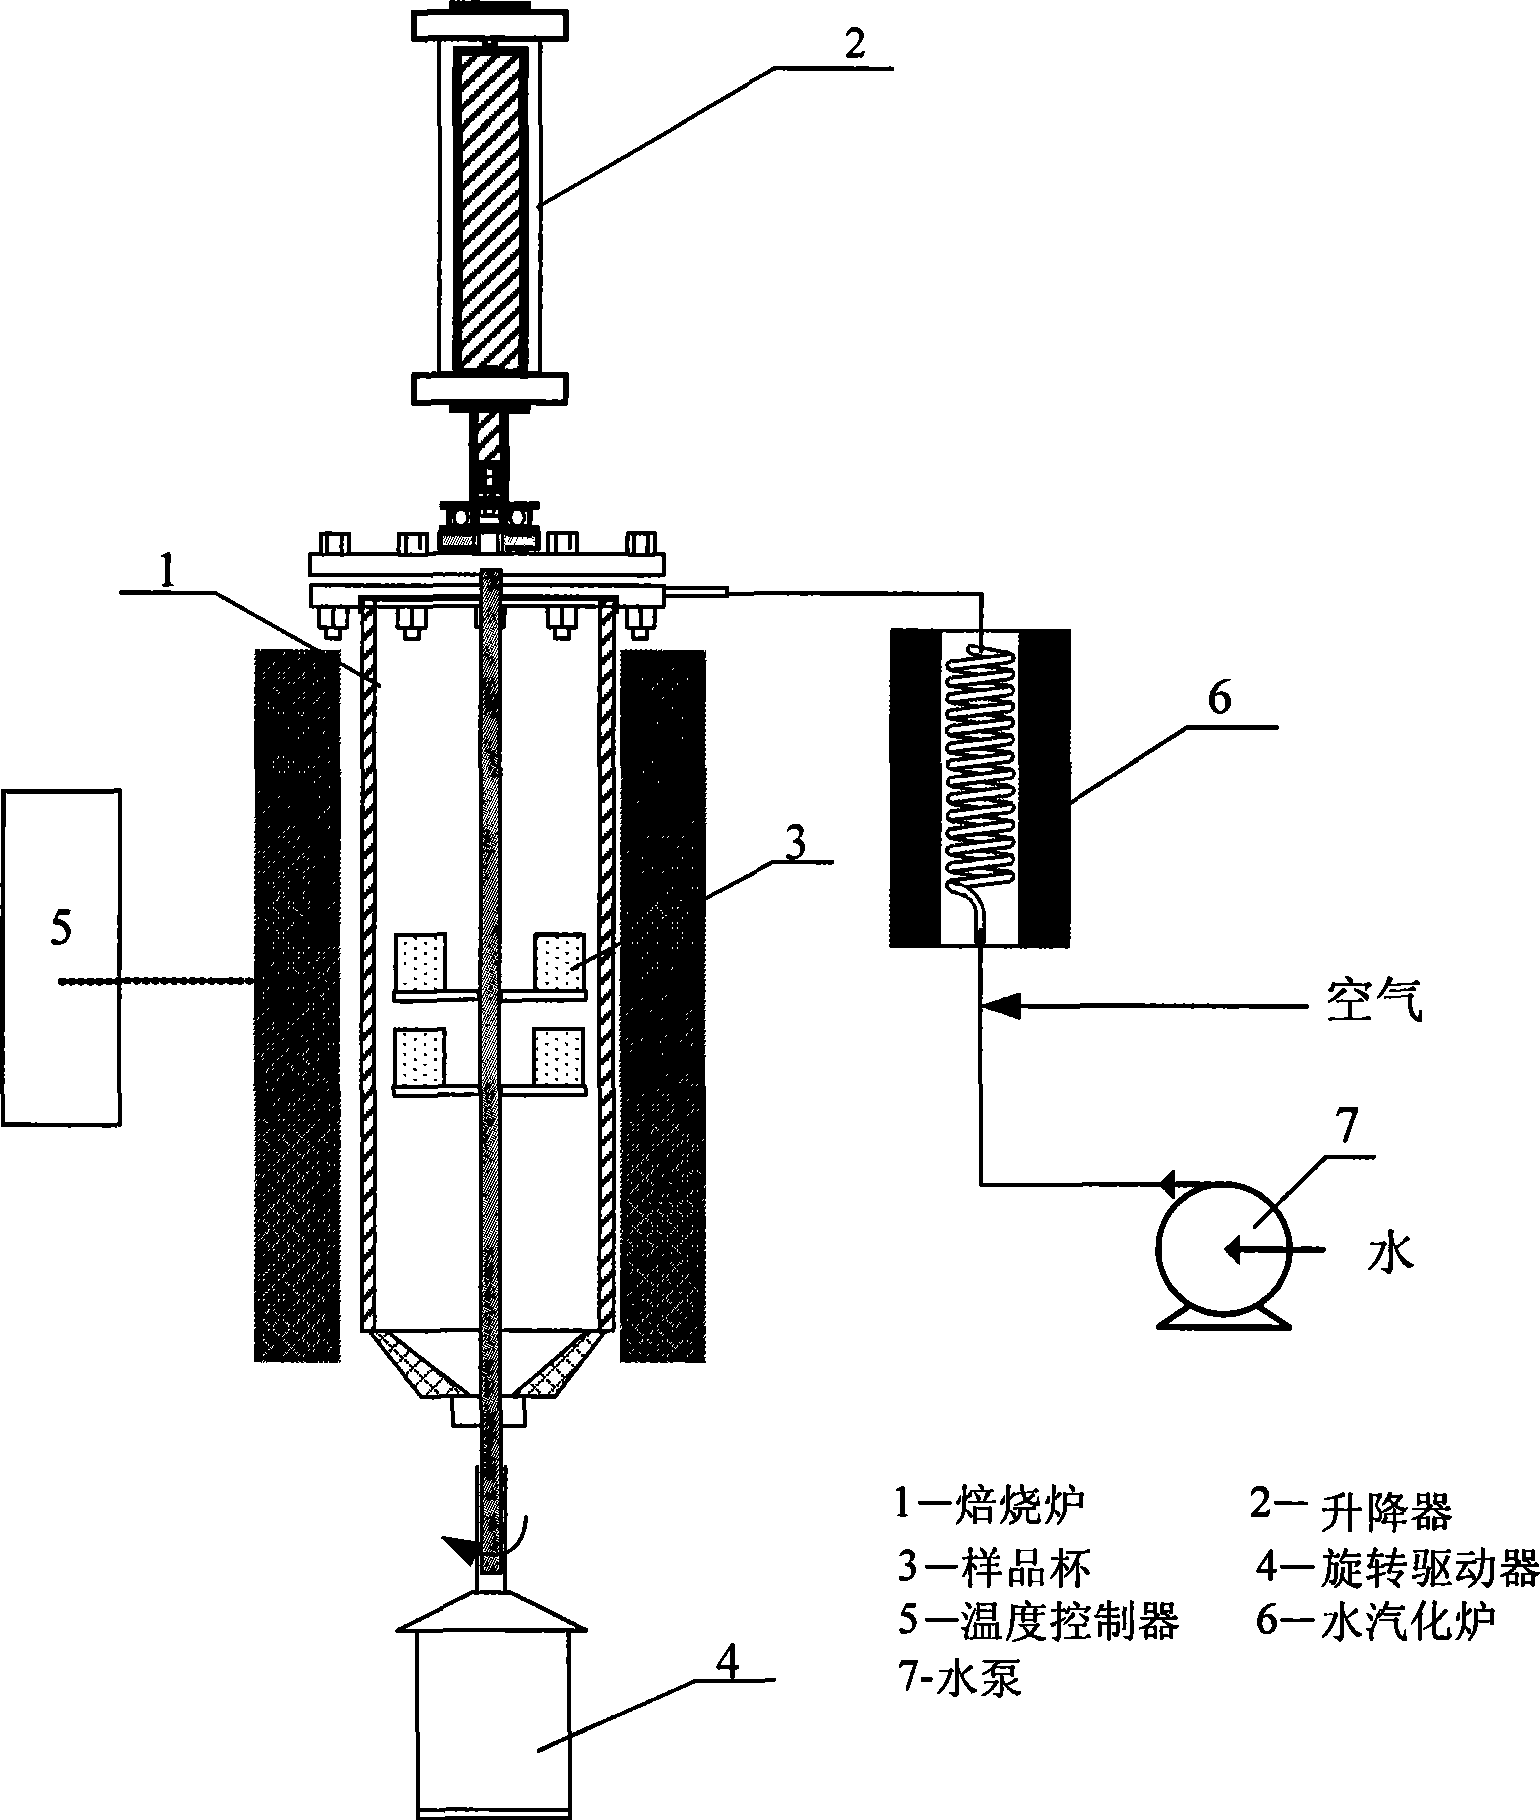 Multi-example high-temperature rotating and roasting device